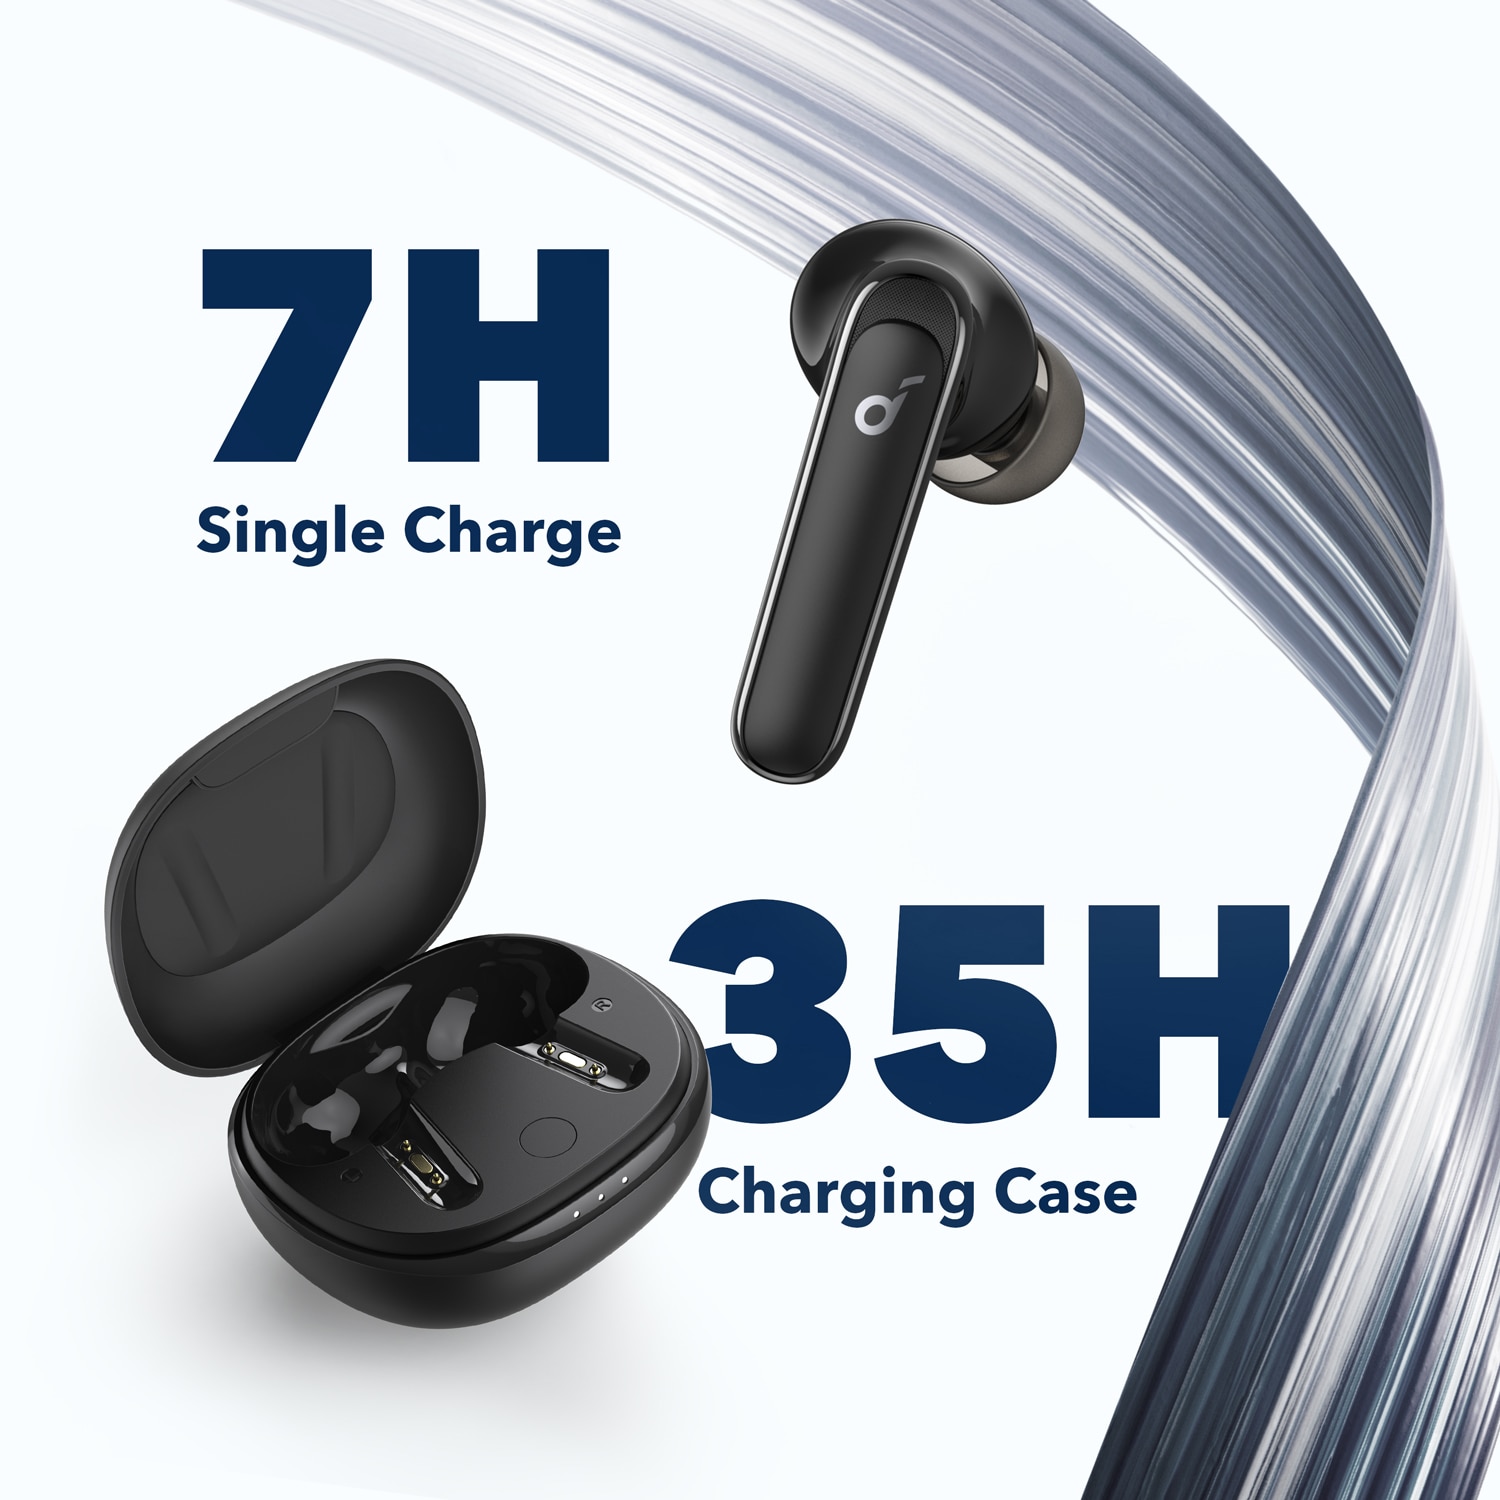 Anker Soundcore Life P3 Wireless Earbuds